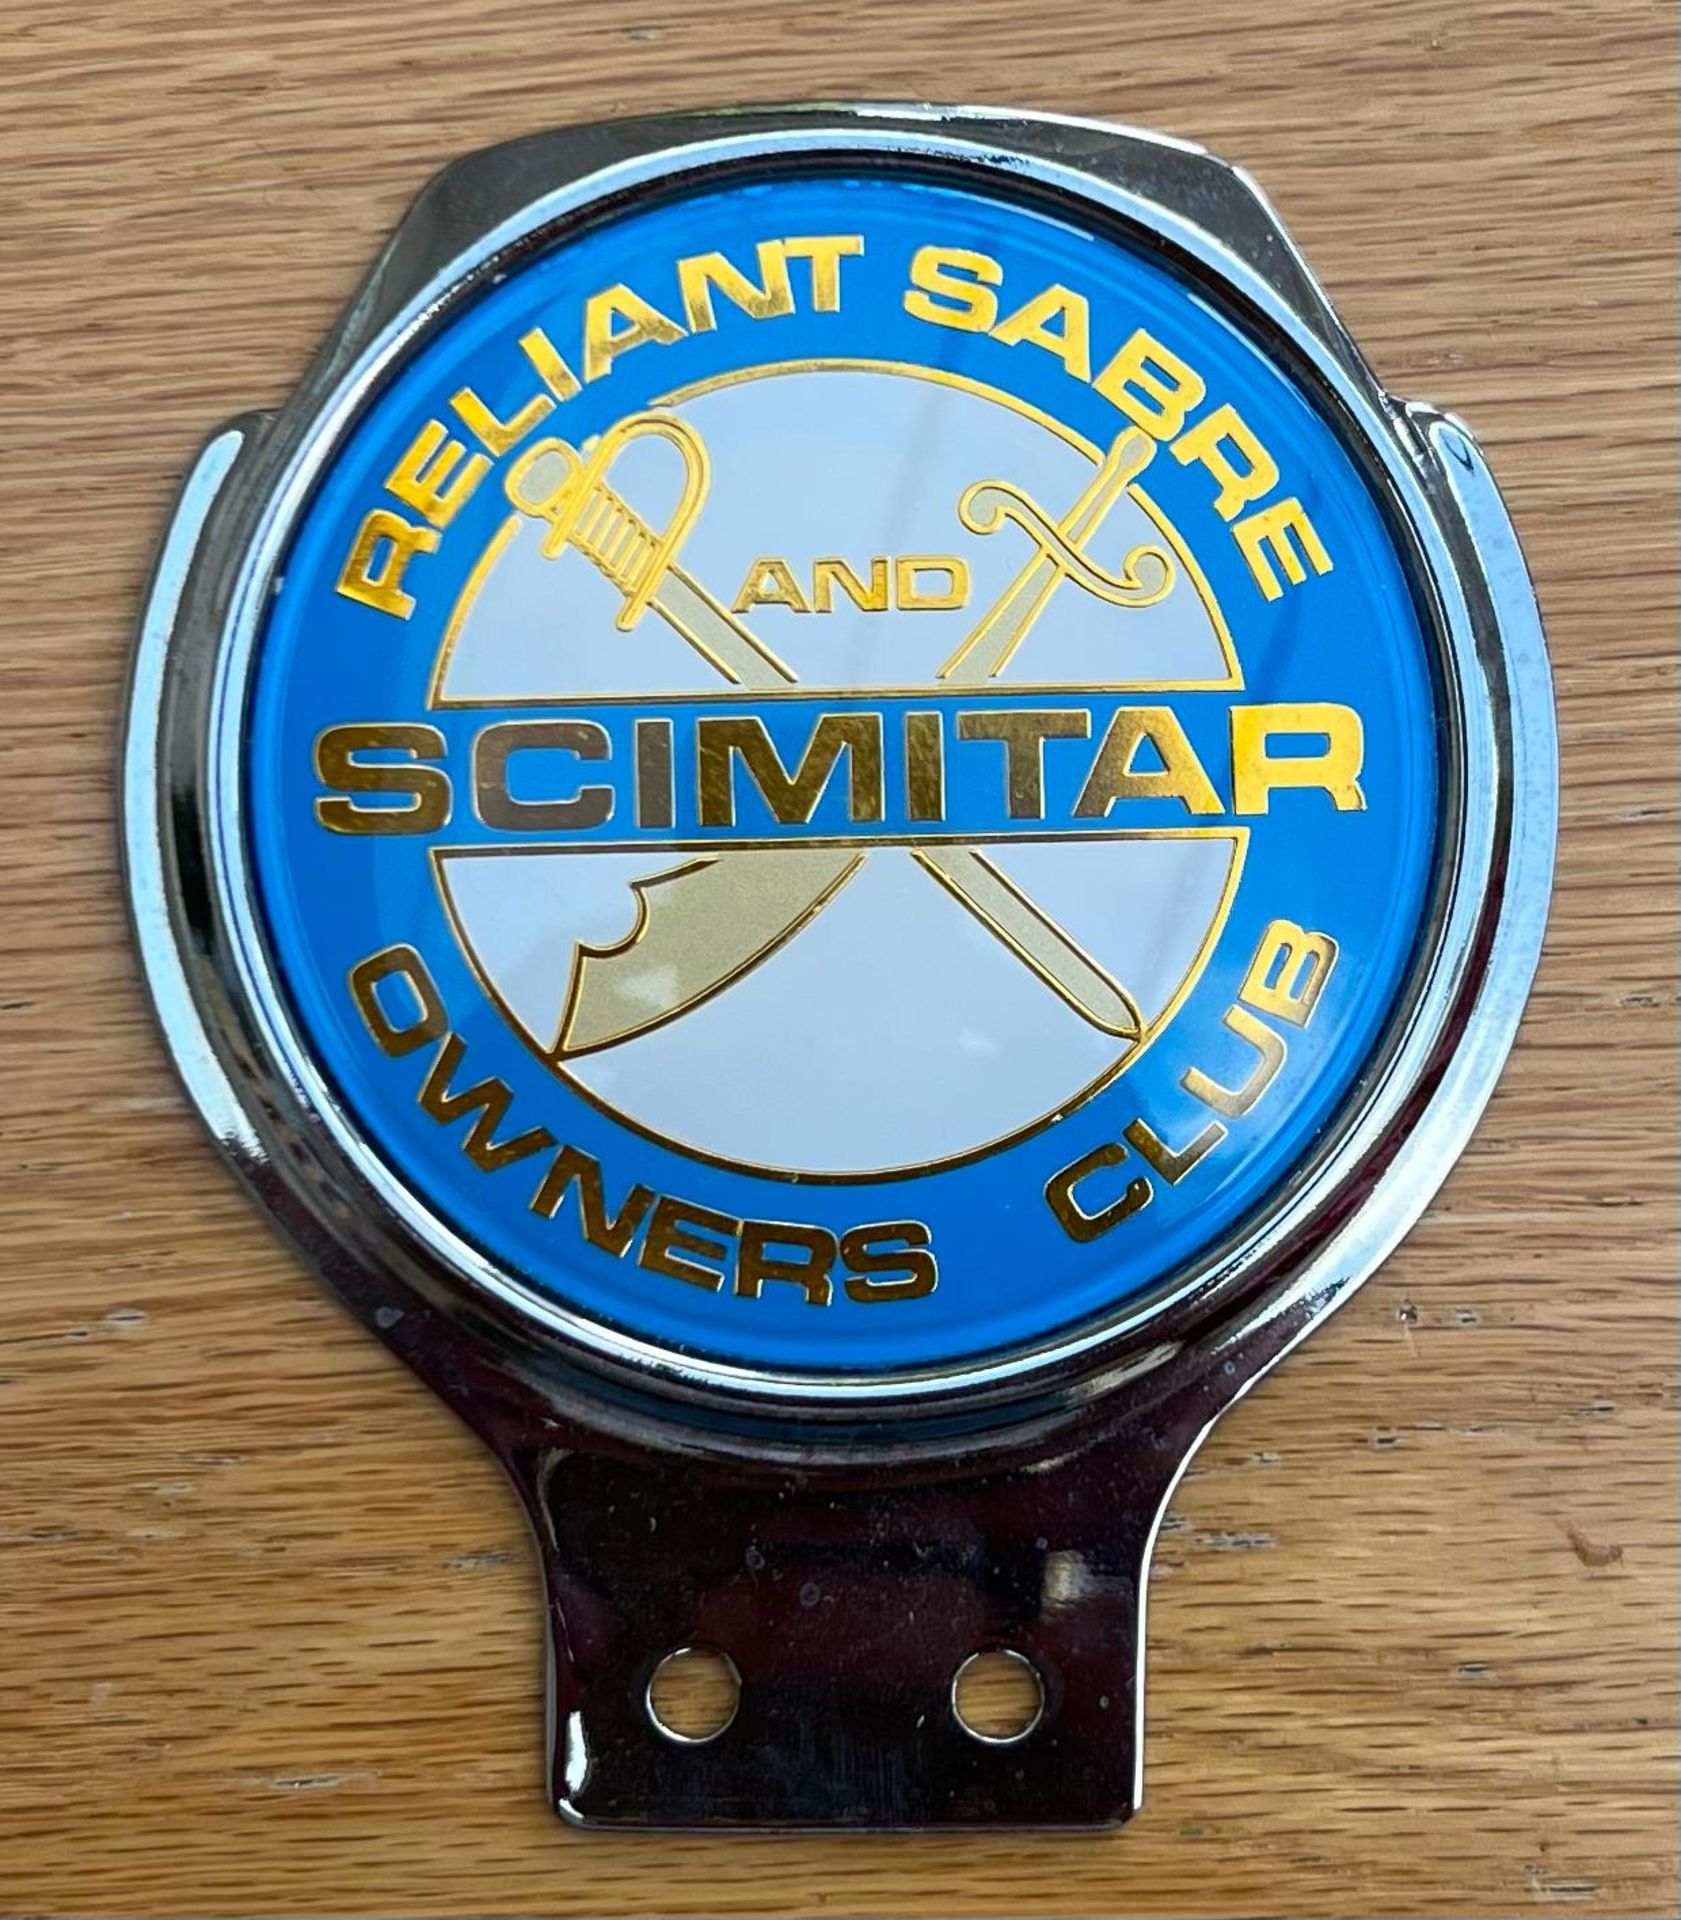 A rare Reliant Sabre & Scimitar Owners Club grill badge by Renamel of London. Measuring 11cm high.